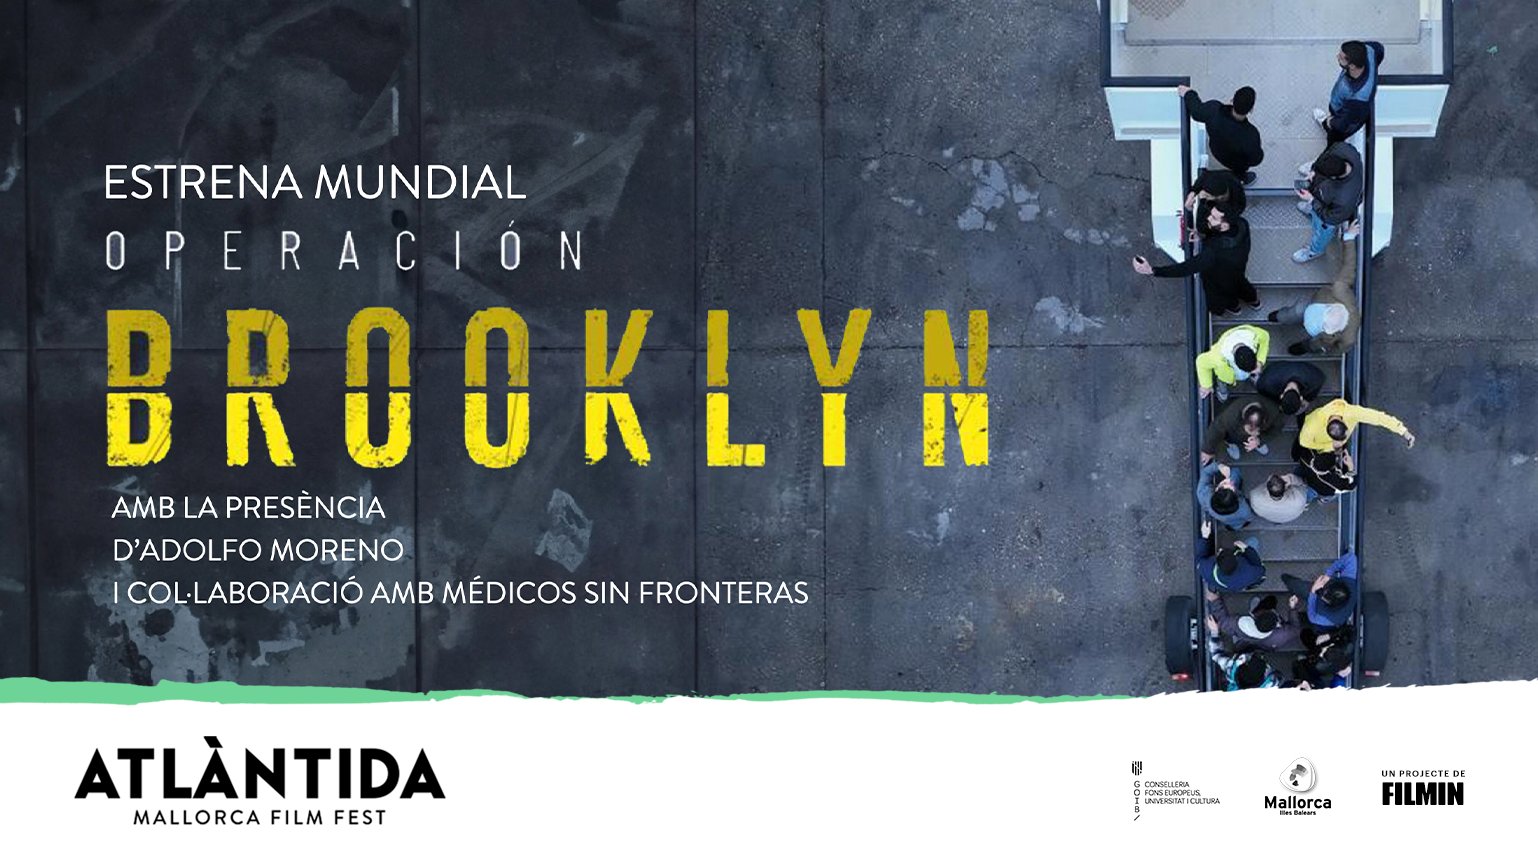 The documentary 'Operación Brooklyn' (CAPA Spain) will be premiered at the Atlantida Film Fest 2023